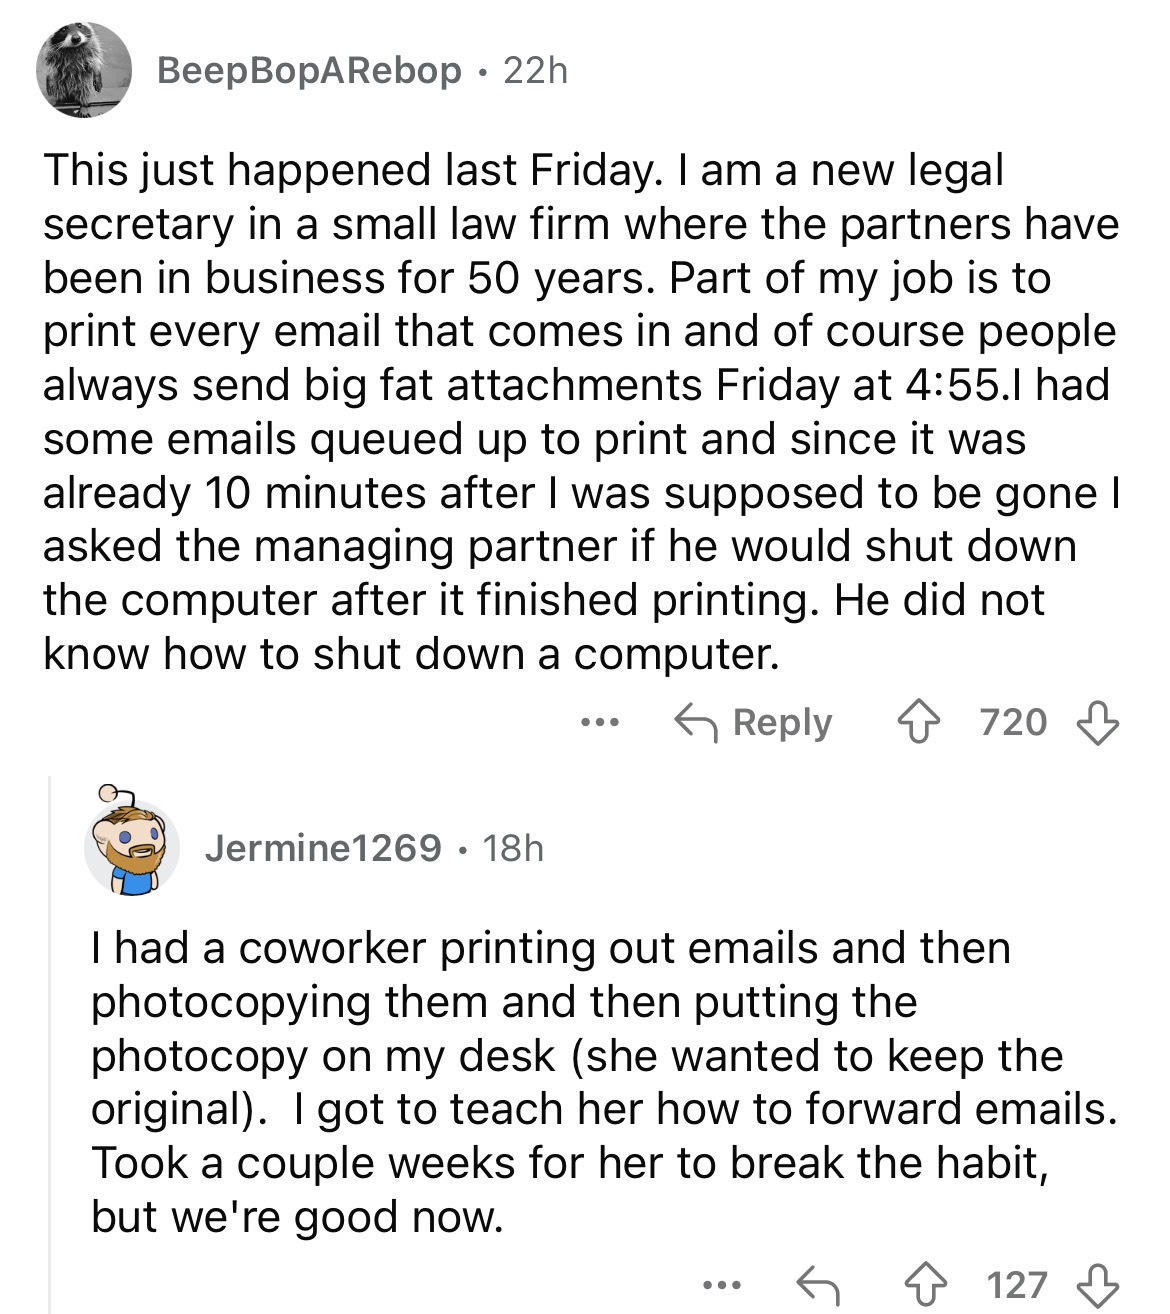 document - BeepBopARebop 22h This just happened last Friday. I am a new legal secretary in a small law firm where the partners have been in business for 50 years. Part of my job is to print every email that comes in and of course people always send big fa